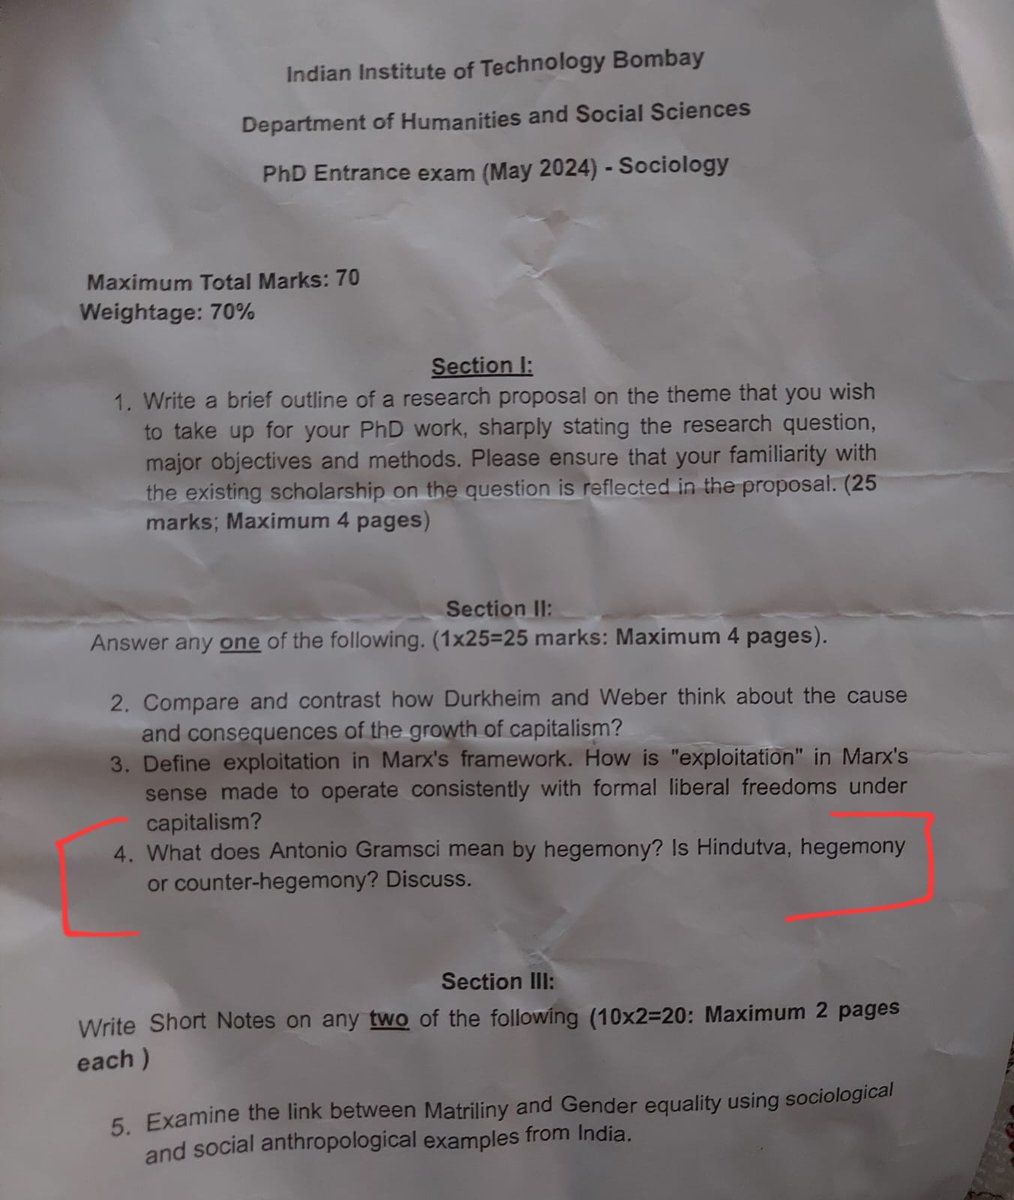 The Anti-Hindu Professors of Sociology from @iitbombay Department of Humanities and Social Sciences openly insulted Hinduism by labeling it a 'Hegemony.' The question in the Ph.D Entrance Exam in Sociology (Dt. 07.05.2024) was purposefully designed to identify candidates'